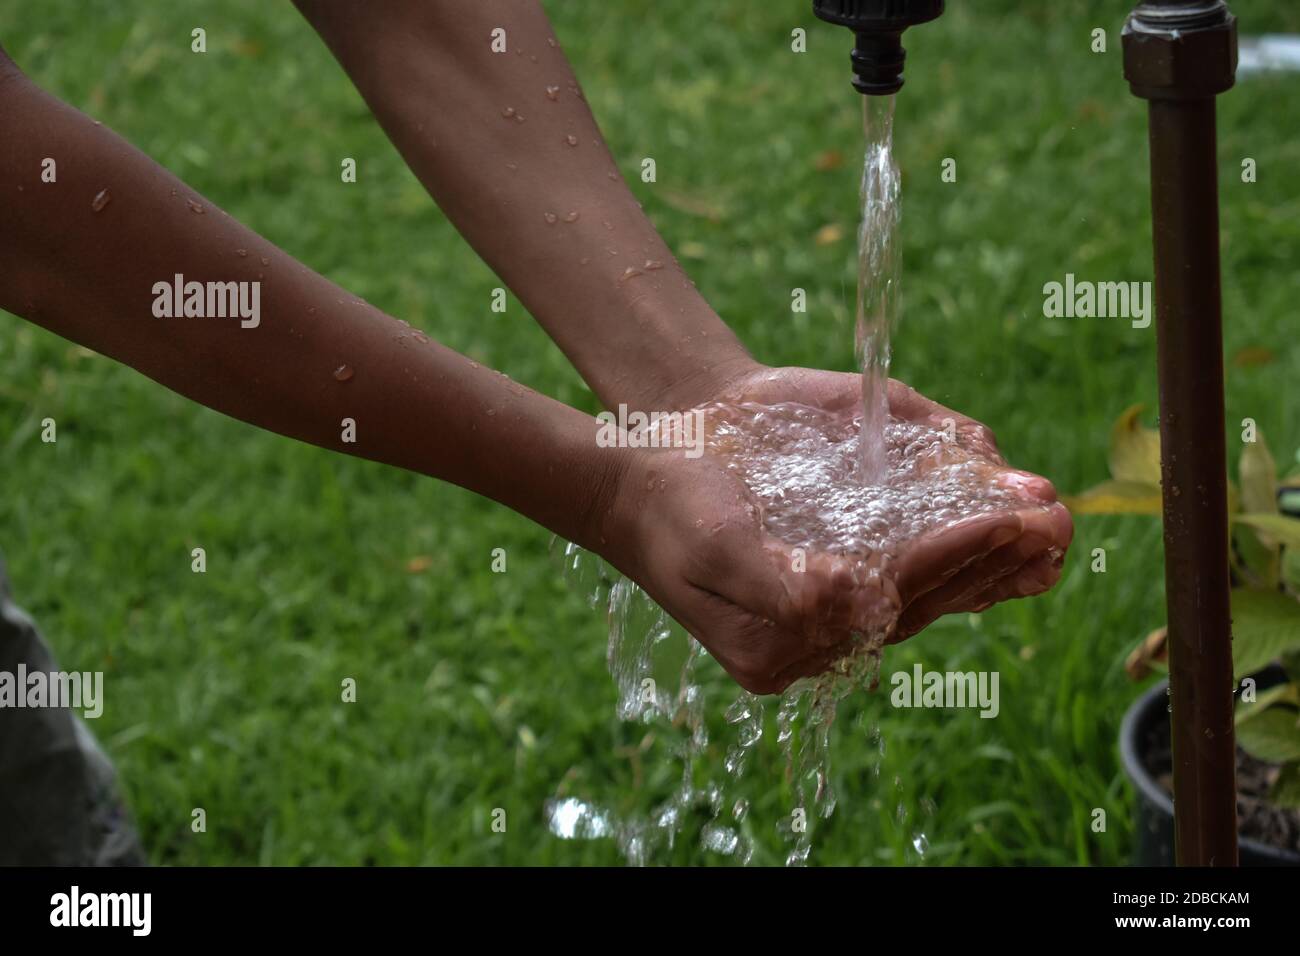 water from an open tap falling into hands with grass in the background Stock Photo